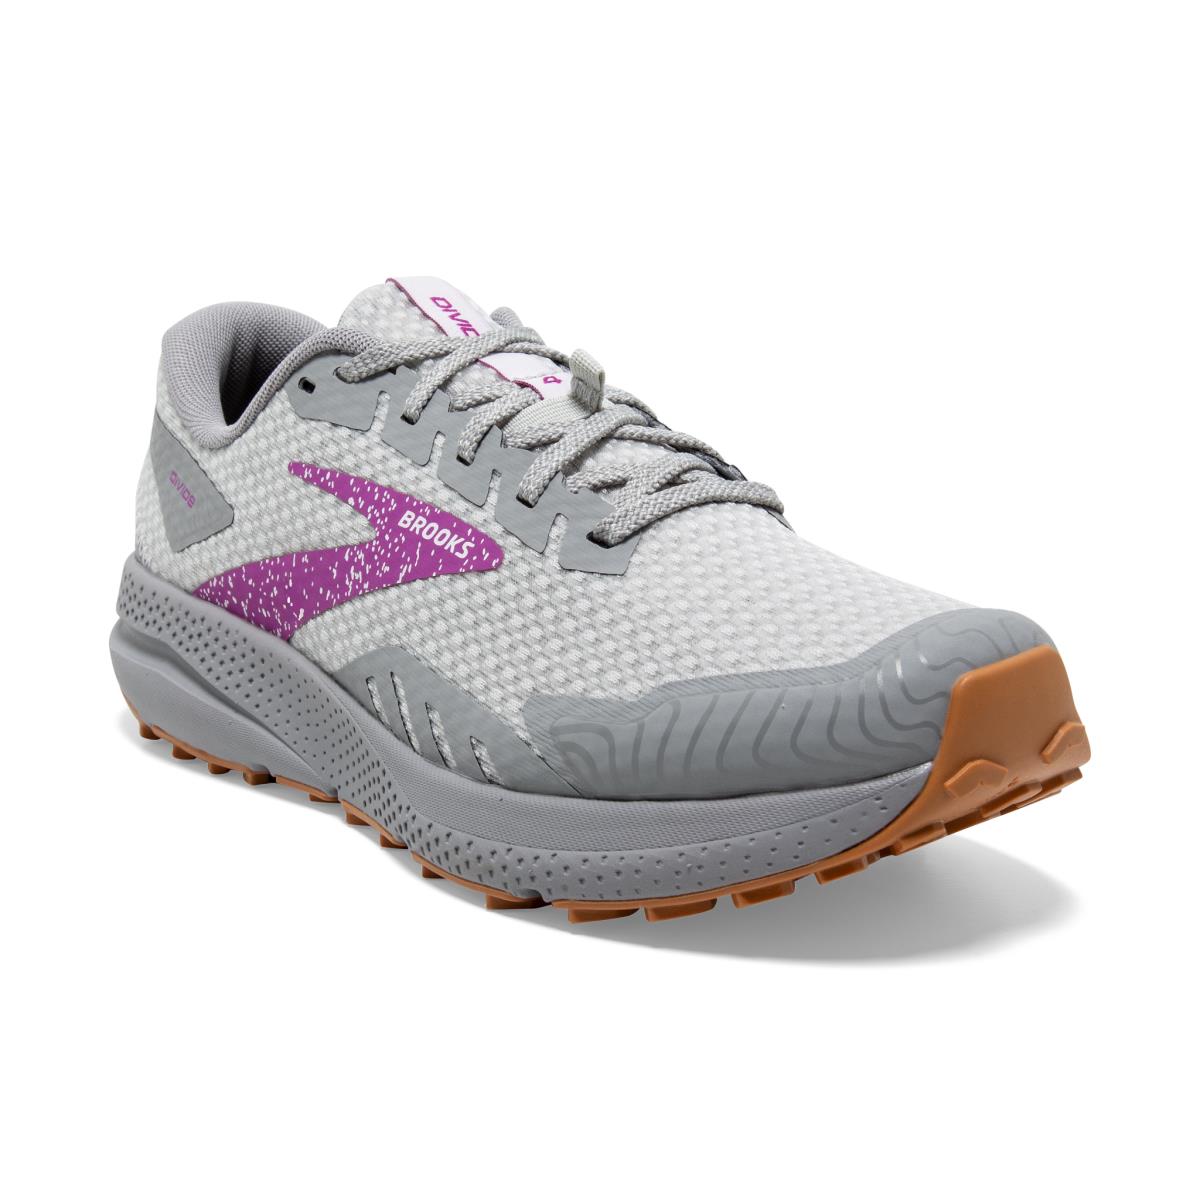 Brooks Divide 4 Women`s Trail Running Shoes Alloy/Oyster/Violet